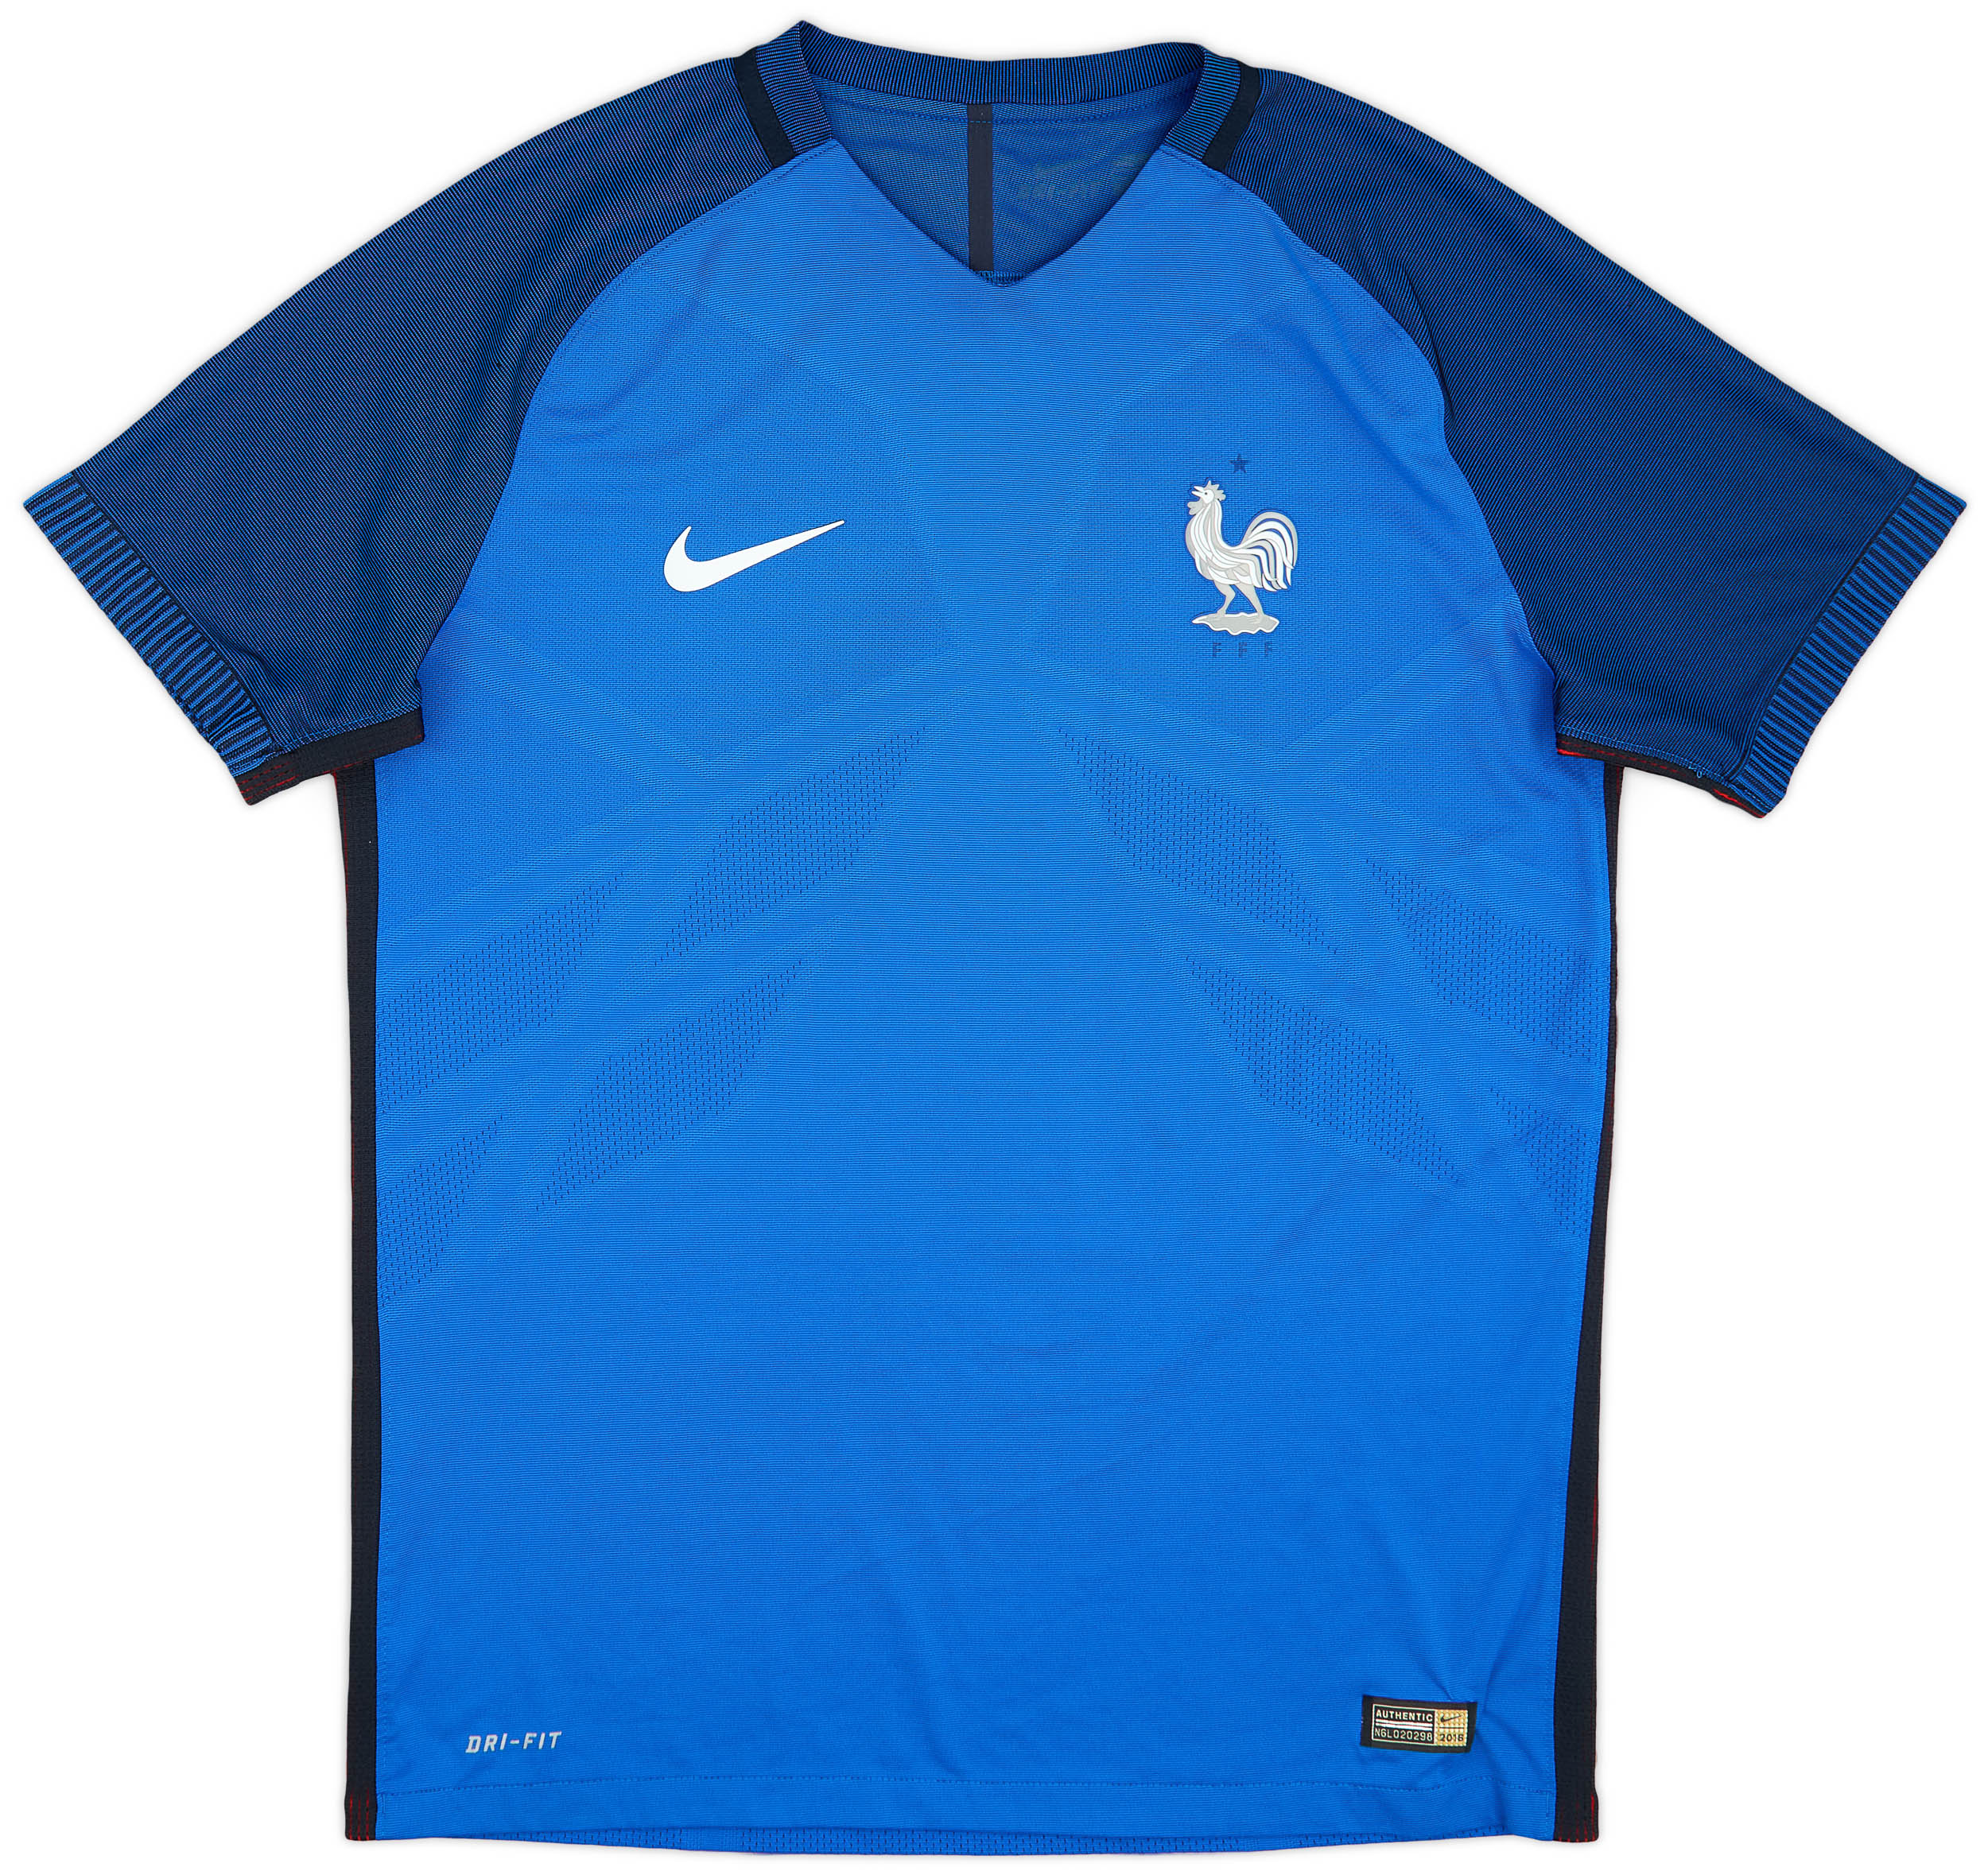 2016-17 France Authentic Home Shirt - 6/10 - ()